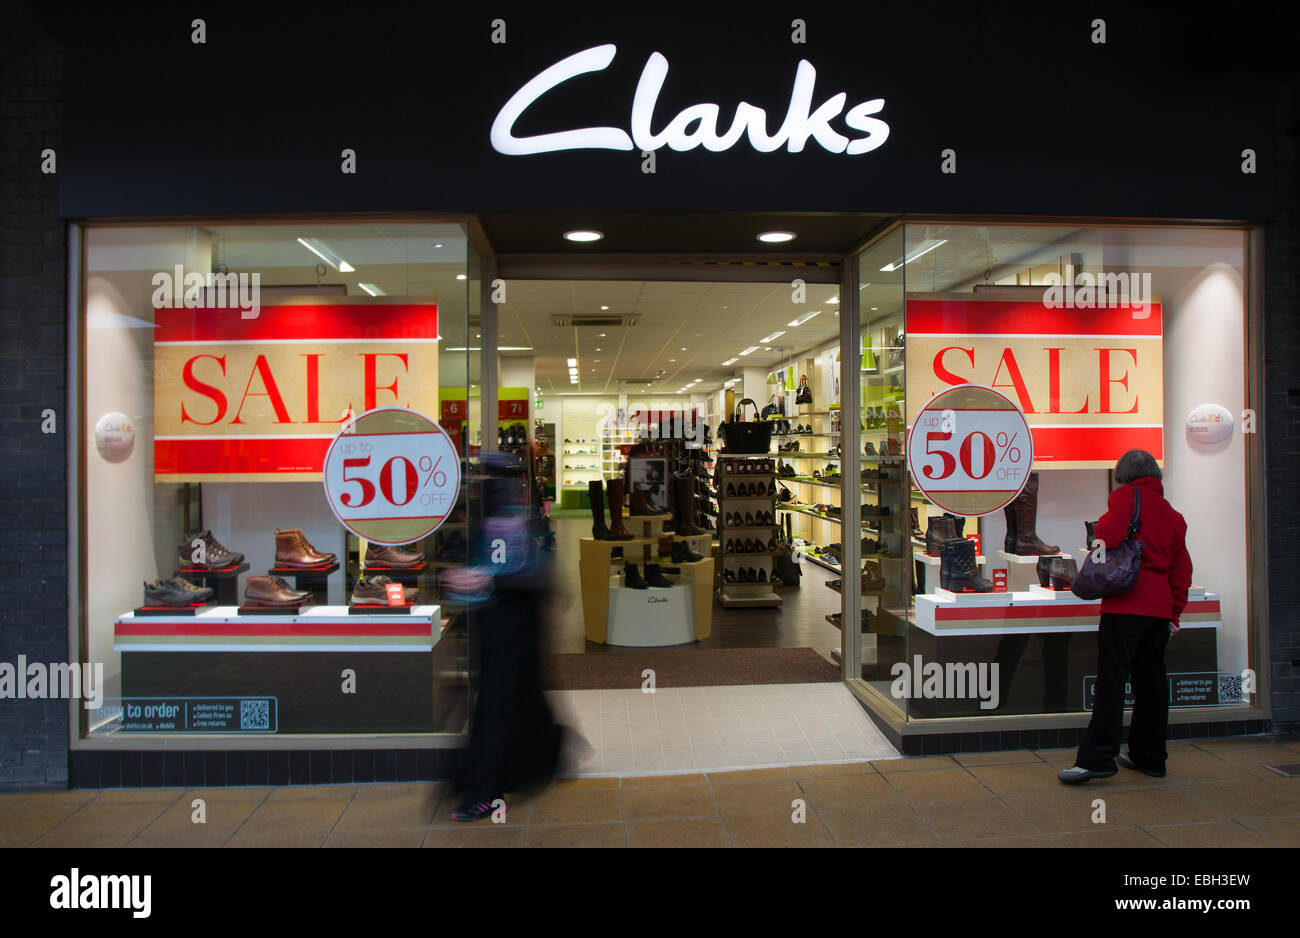 clarks shoes outlet store locations